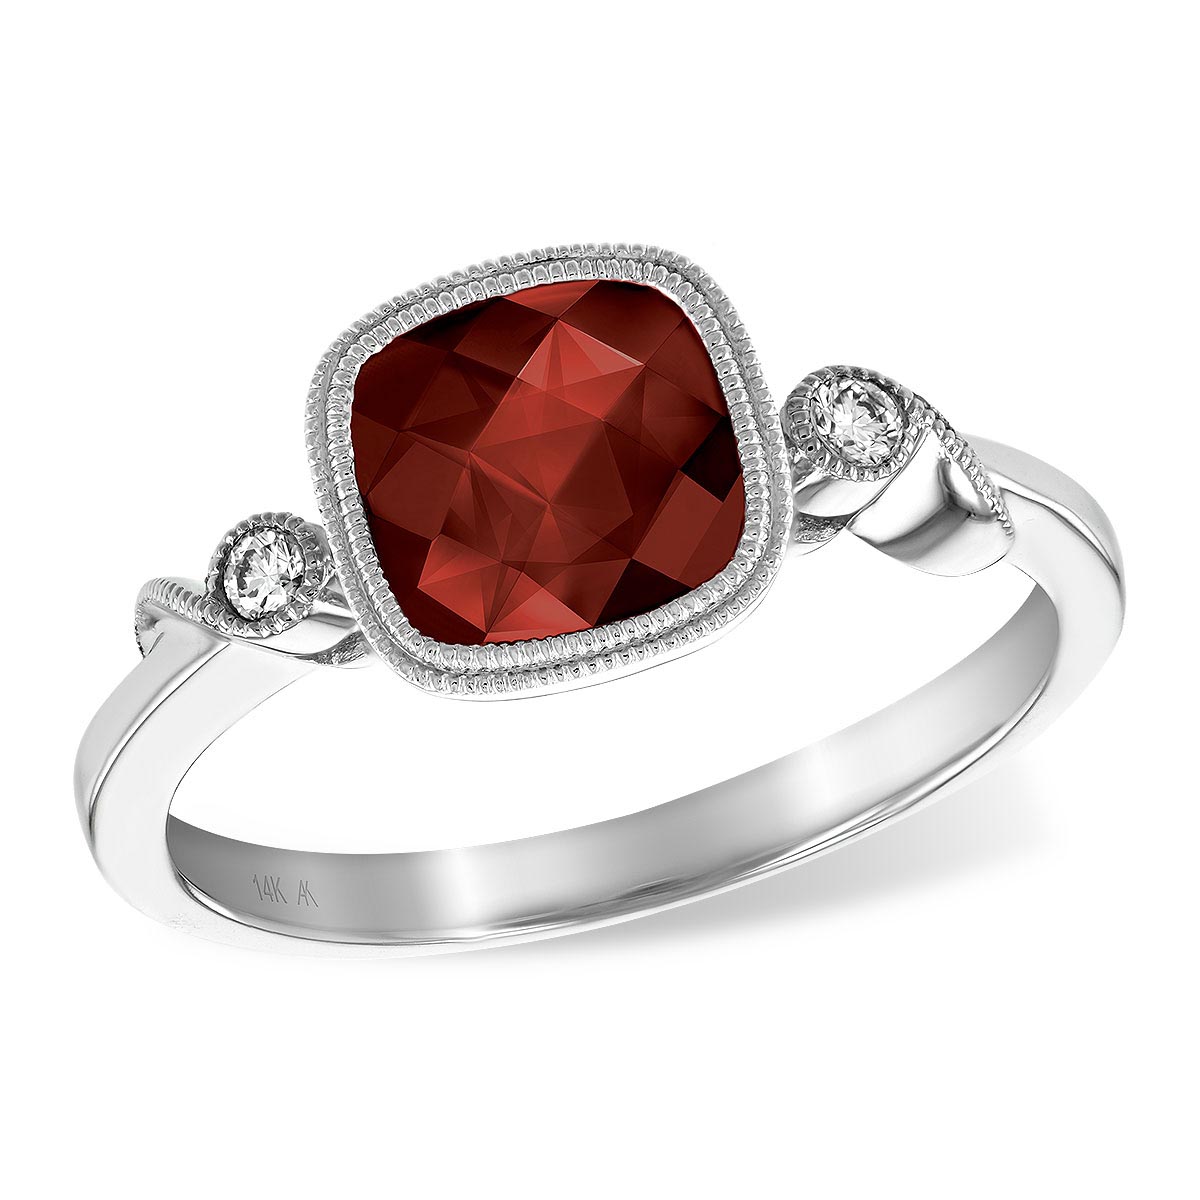 14K White Gold Vintage Inspired Garnet Ring with Diamond Accents — The Gem Shop